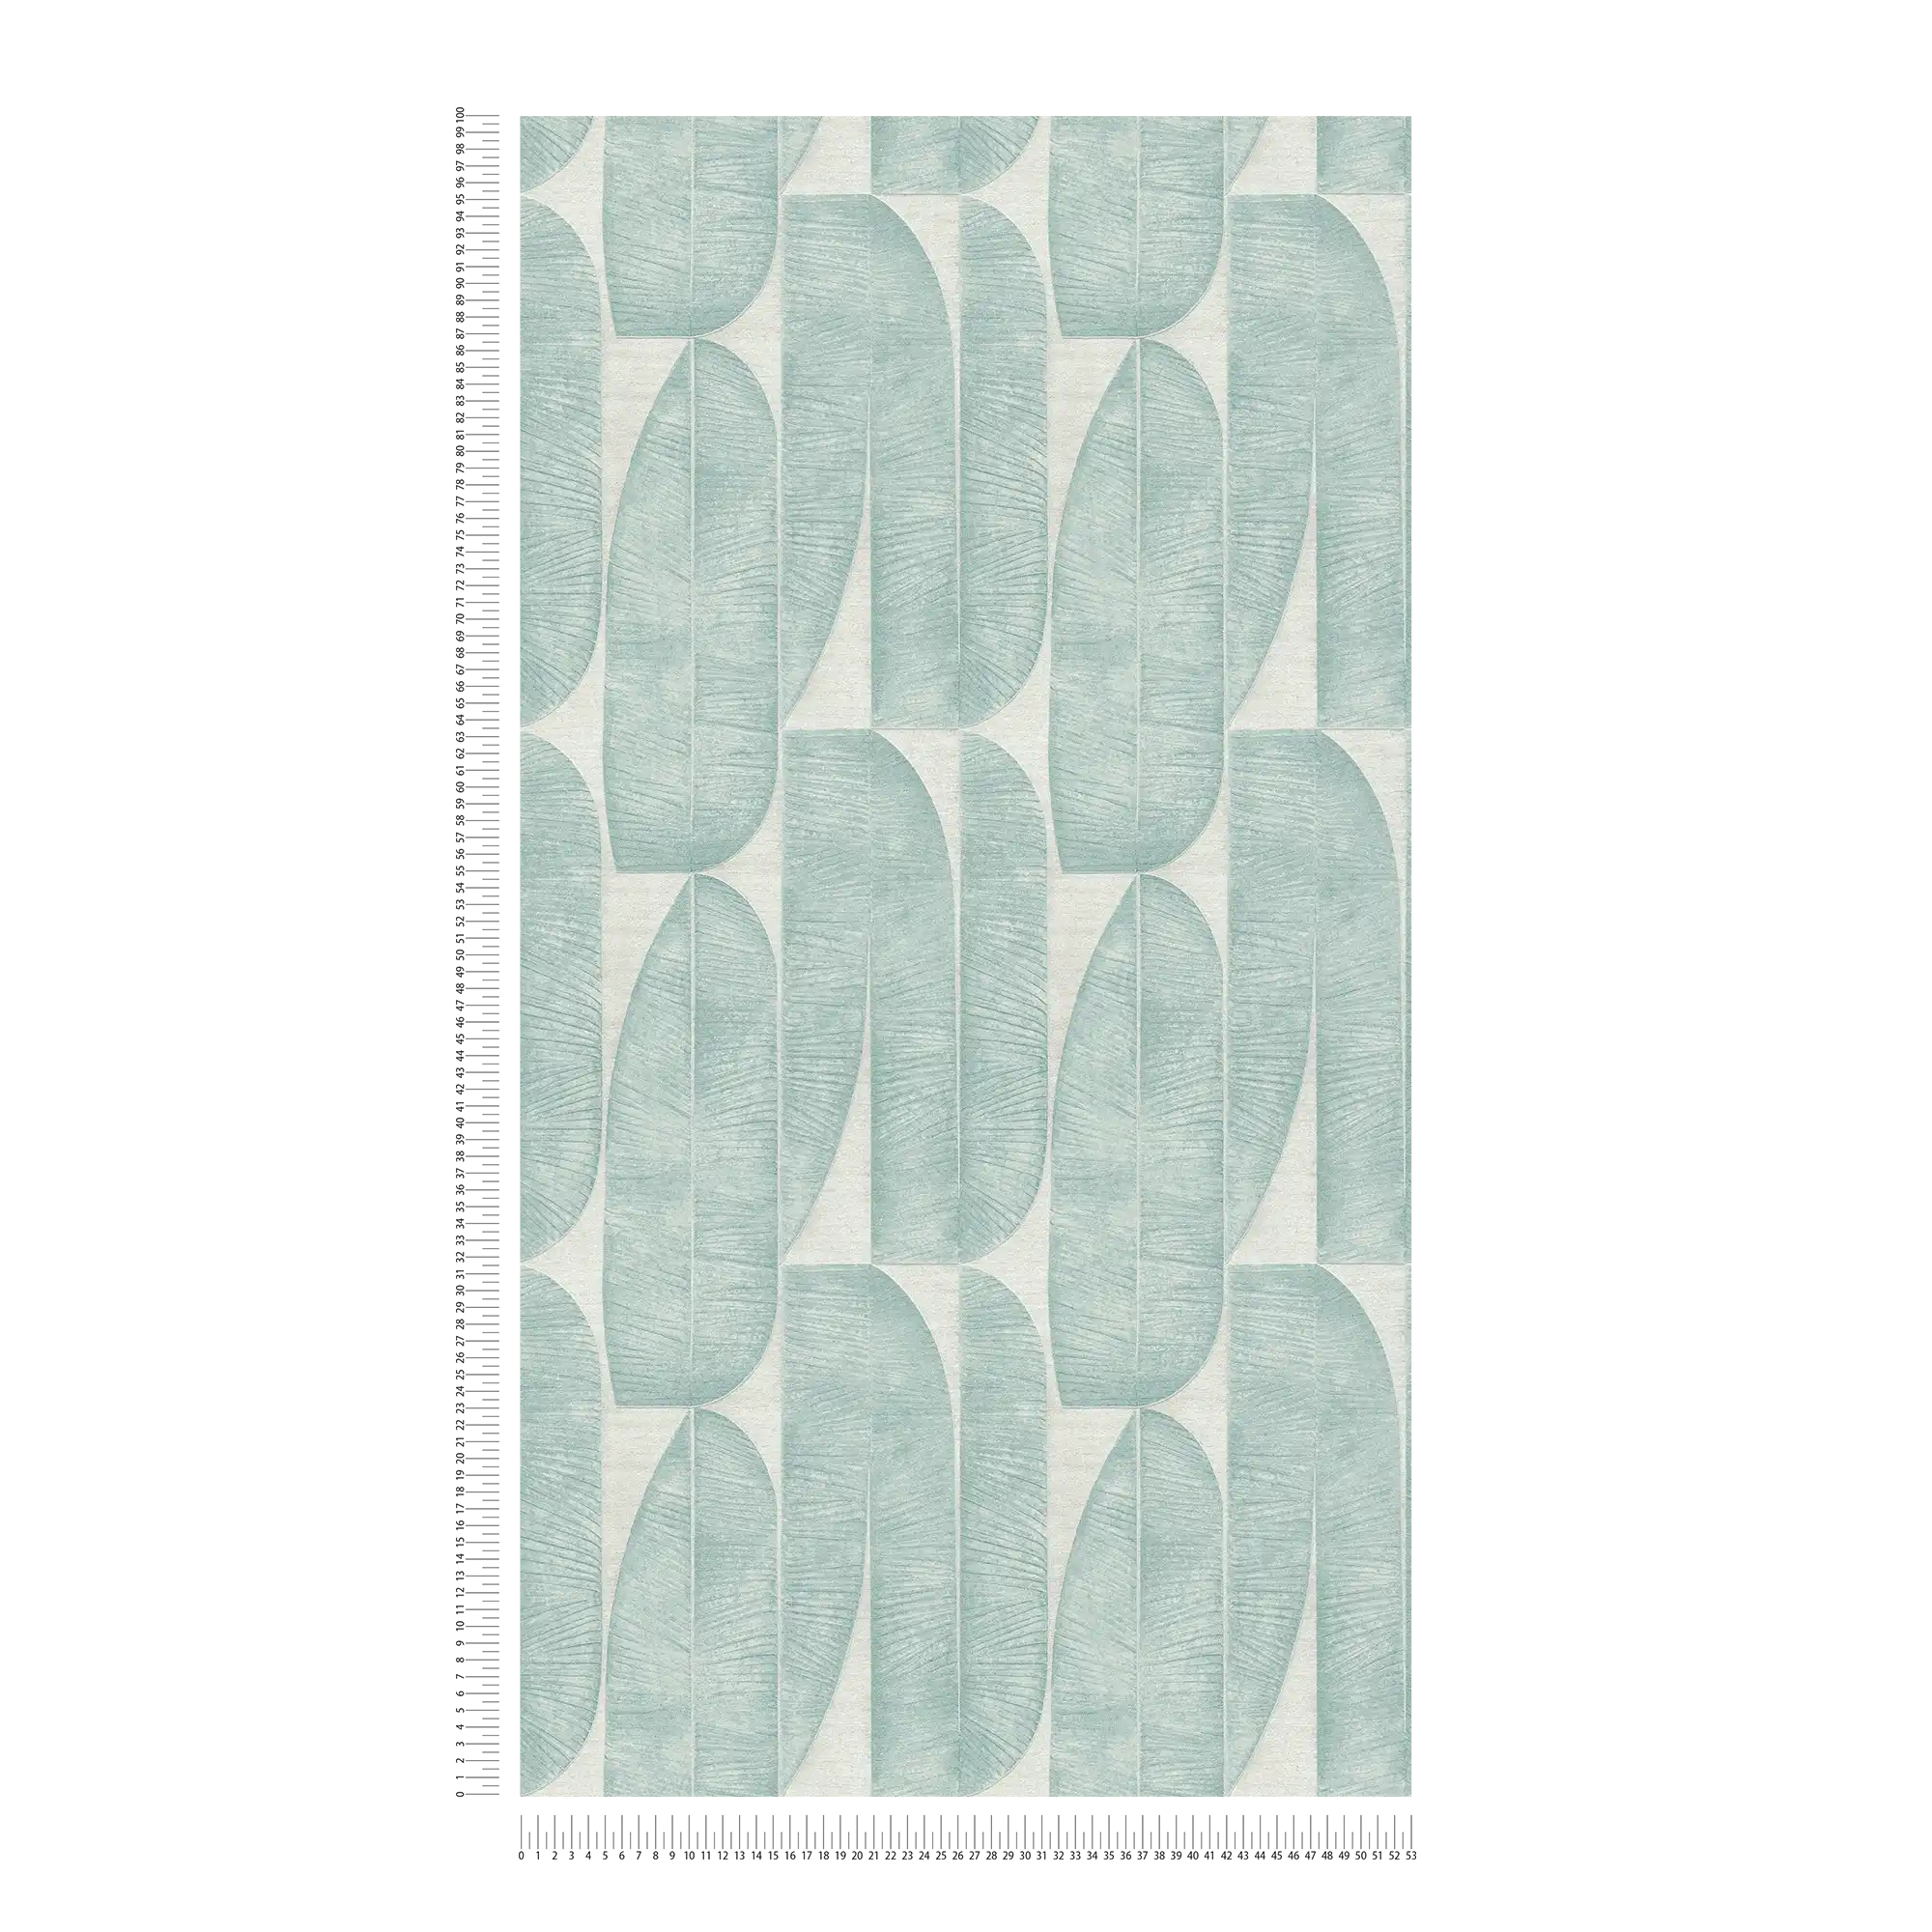             Lightly textured wallpaper with geometric leaf pattern - grey, blue, turquoise
        